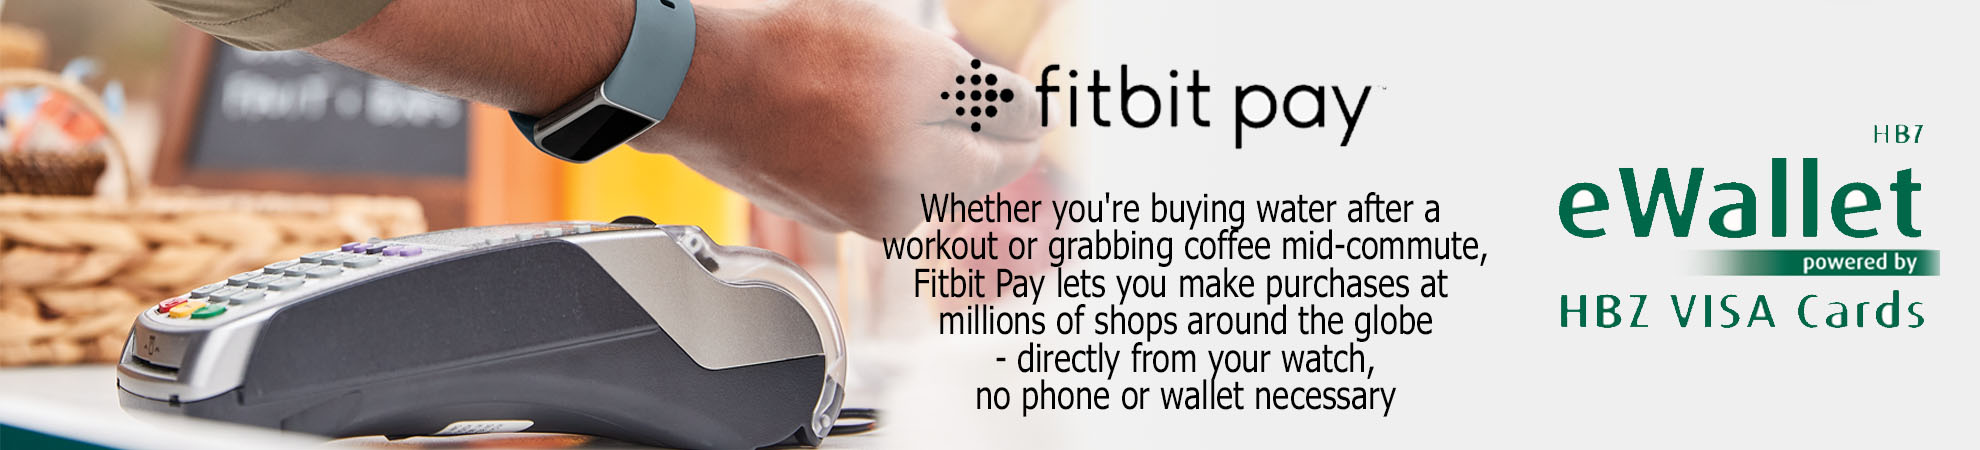 Fitbit Pay 02